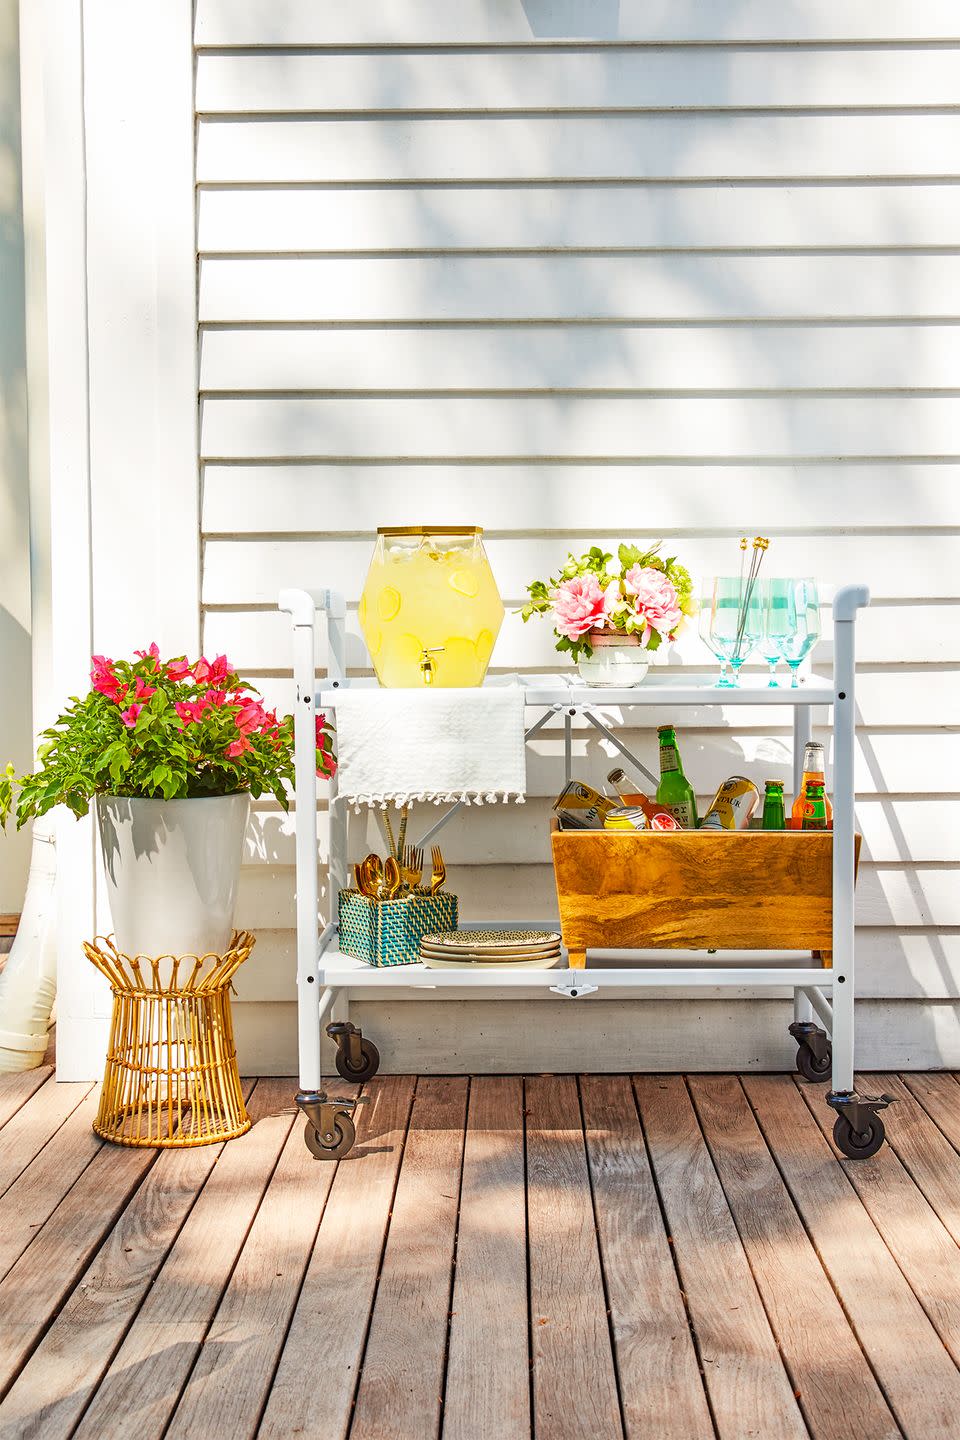 <p>When done right, utility carts become the ultimate drink station. Deck out the shelves with coolers, glasses, utensils and pitchers full of party punch (or another drink of your choice). </p>